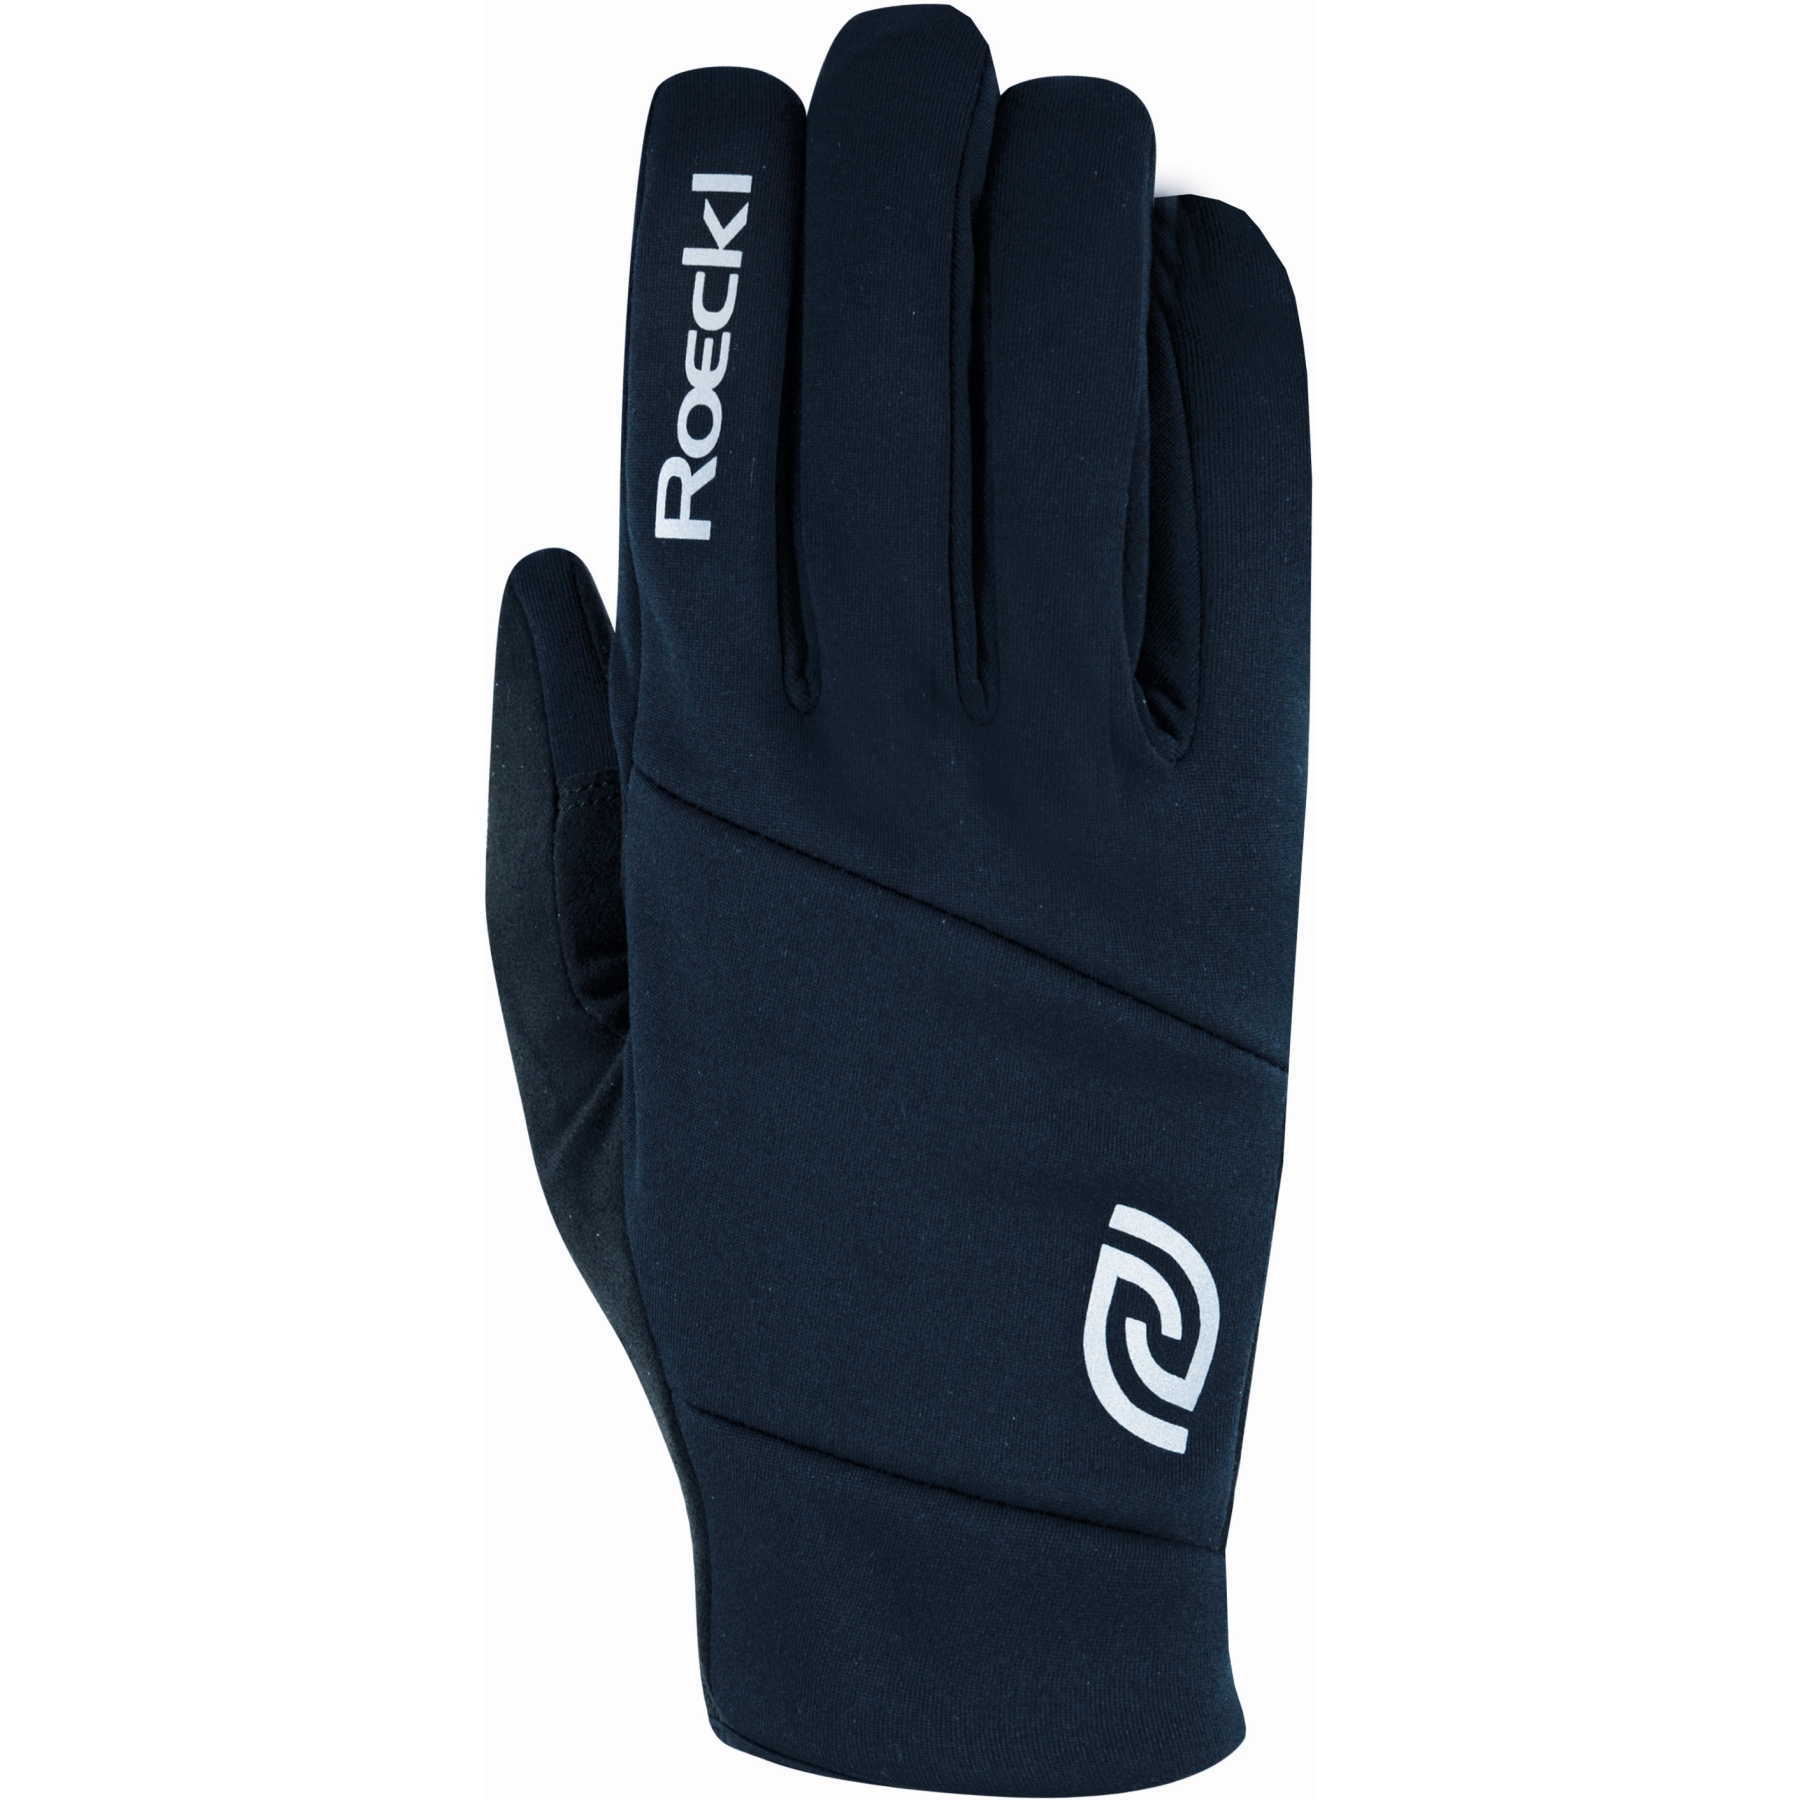 Picture of Roeckl Sports Valepp Cycling Gloves - black 0999